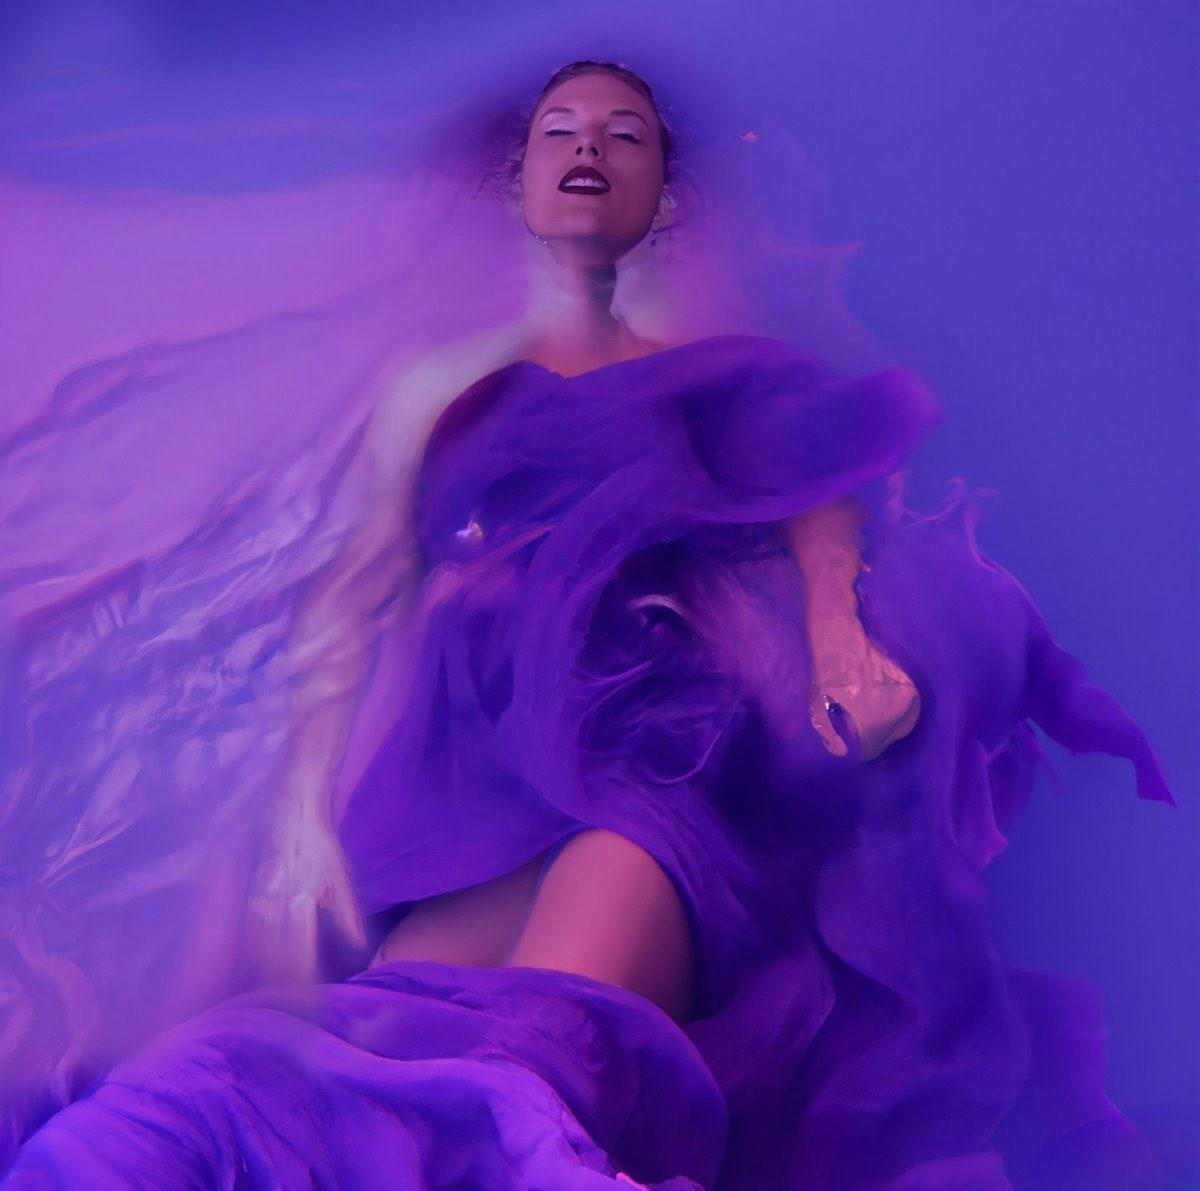 Opinion: Taylor Swift's 'Lavender Haze' music video hints to other